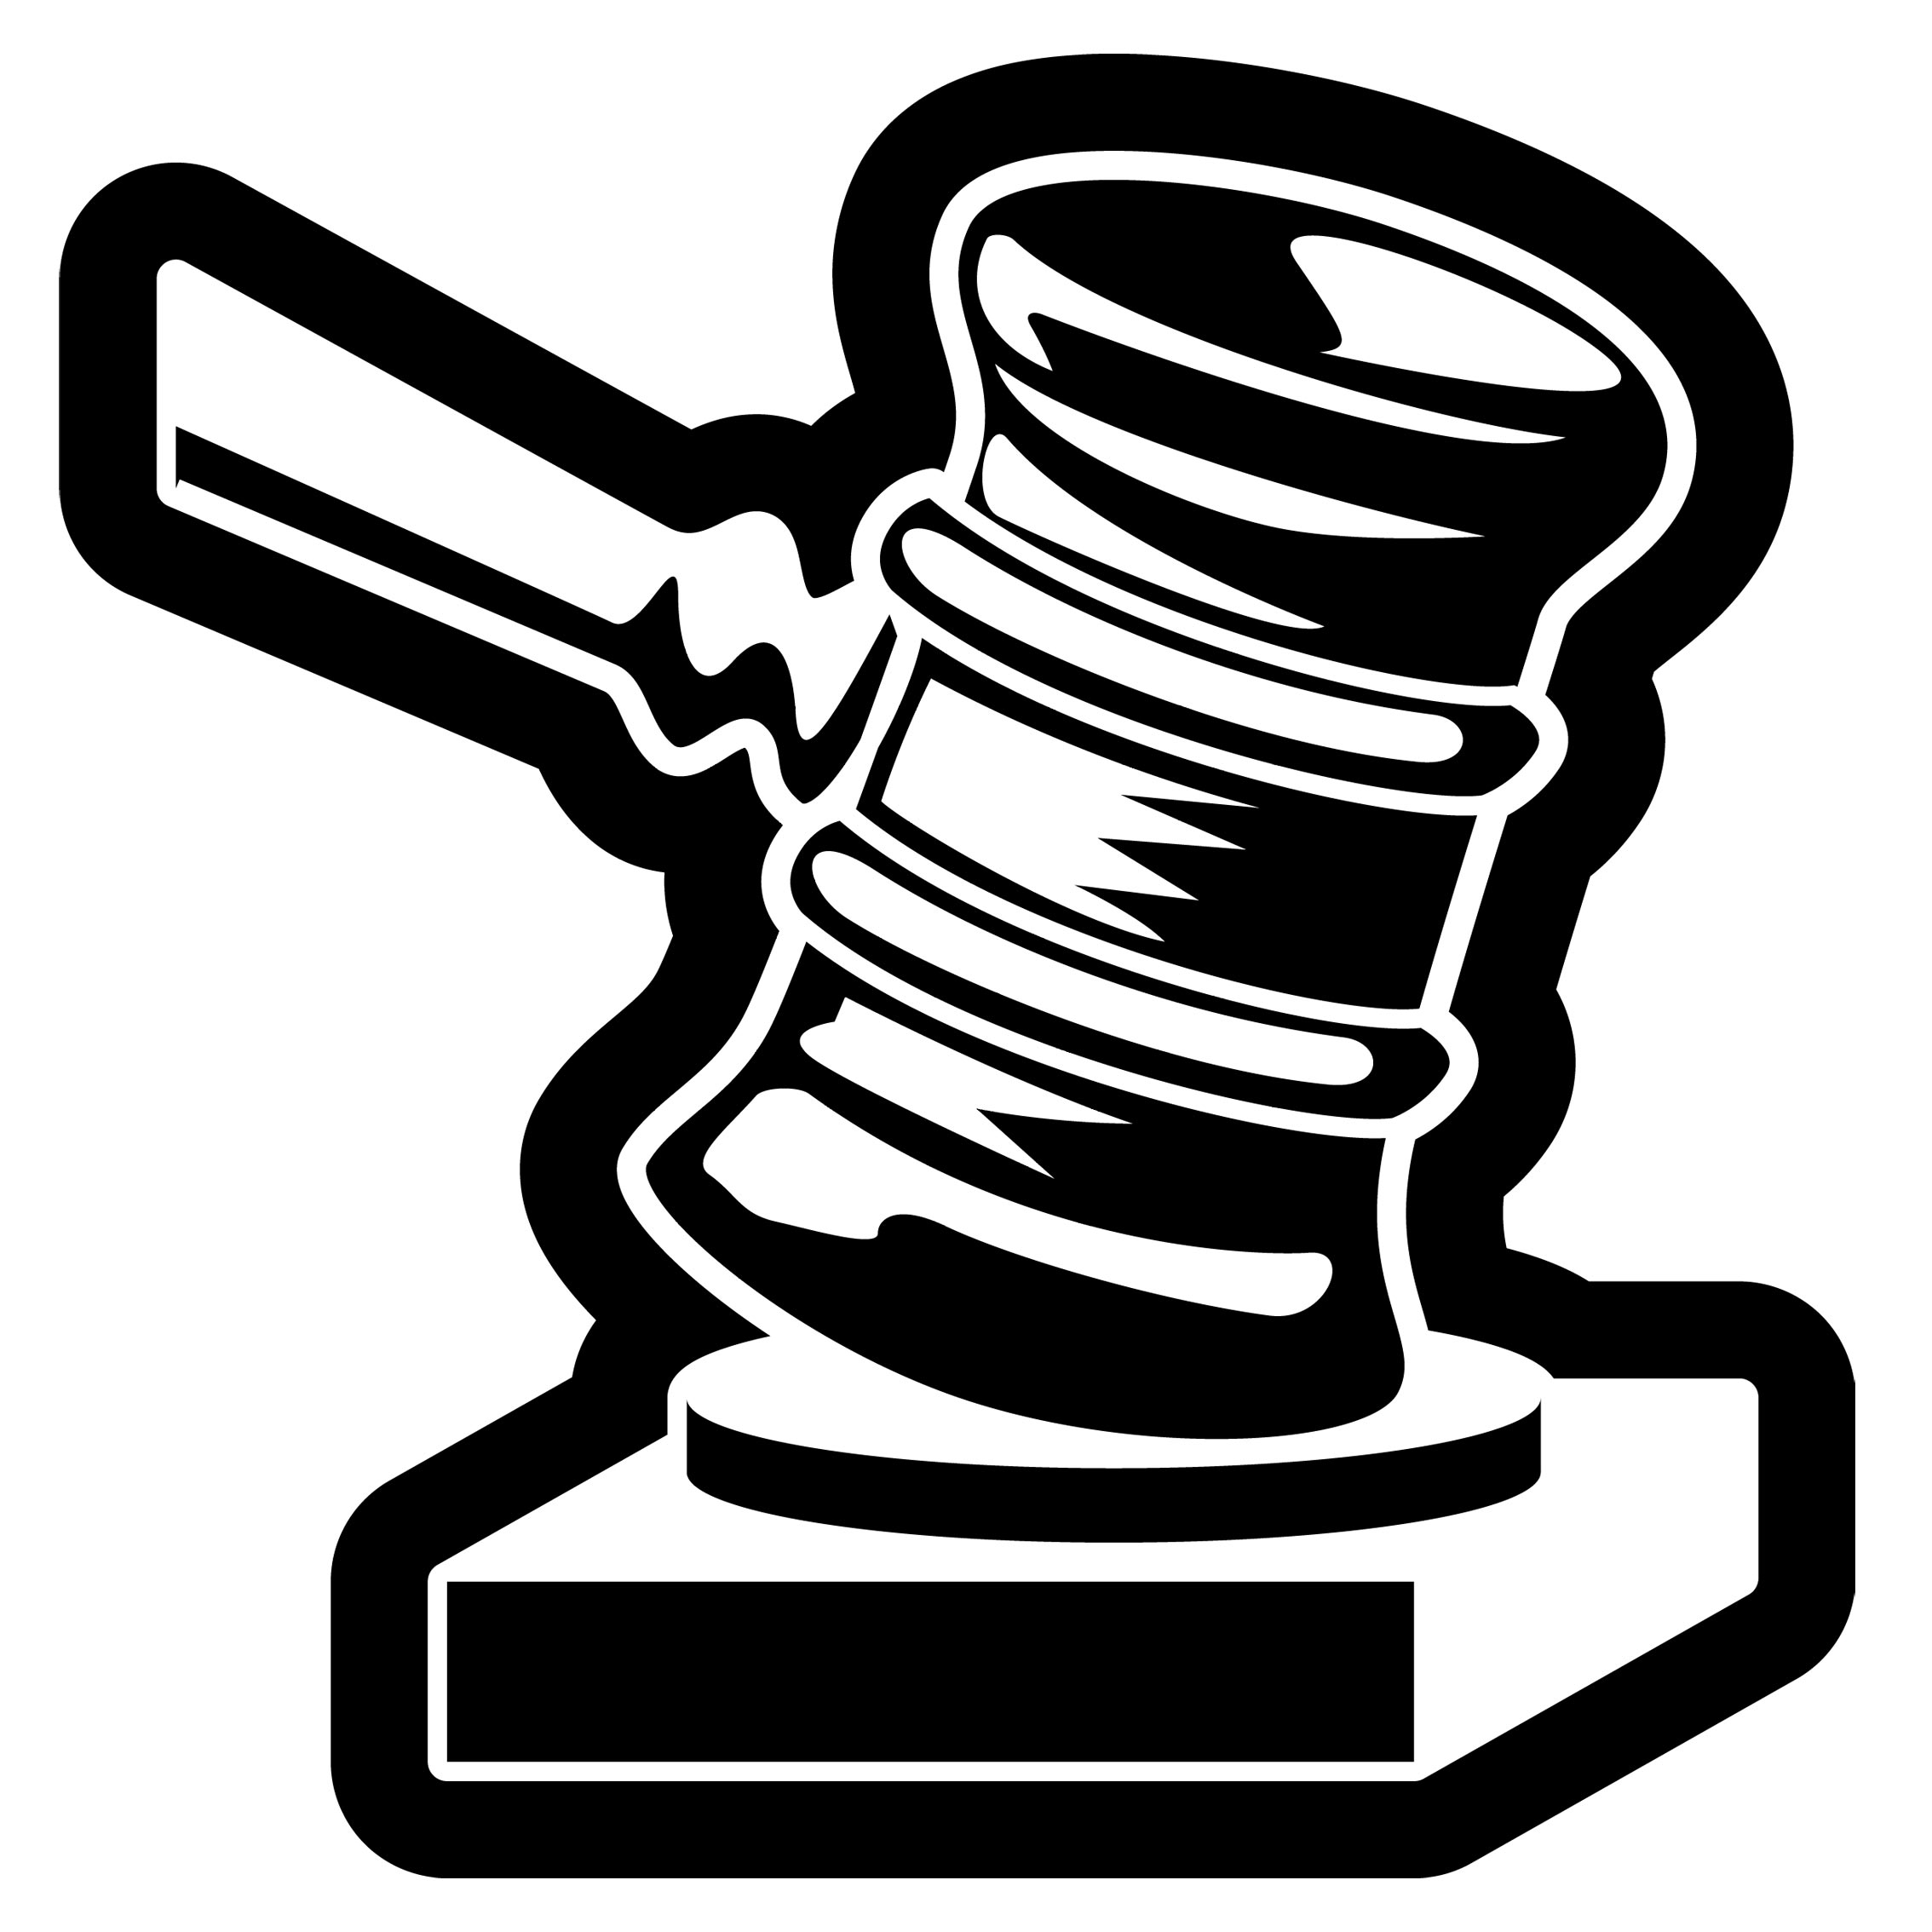 law book clipart - photo #35